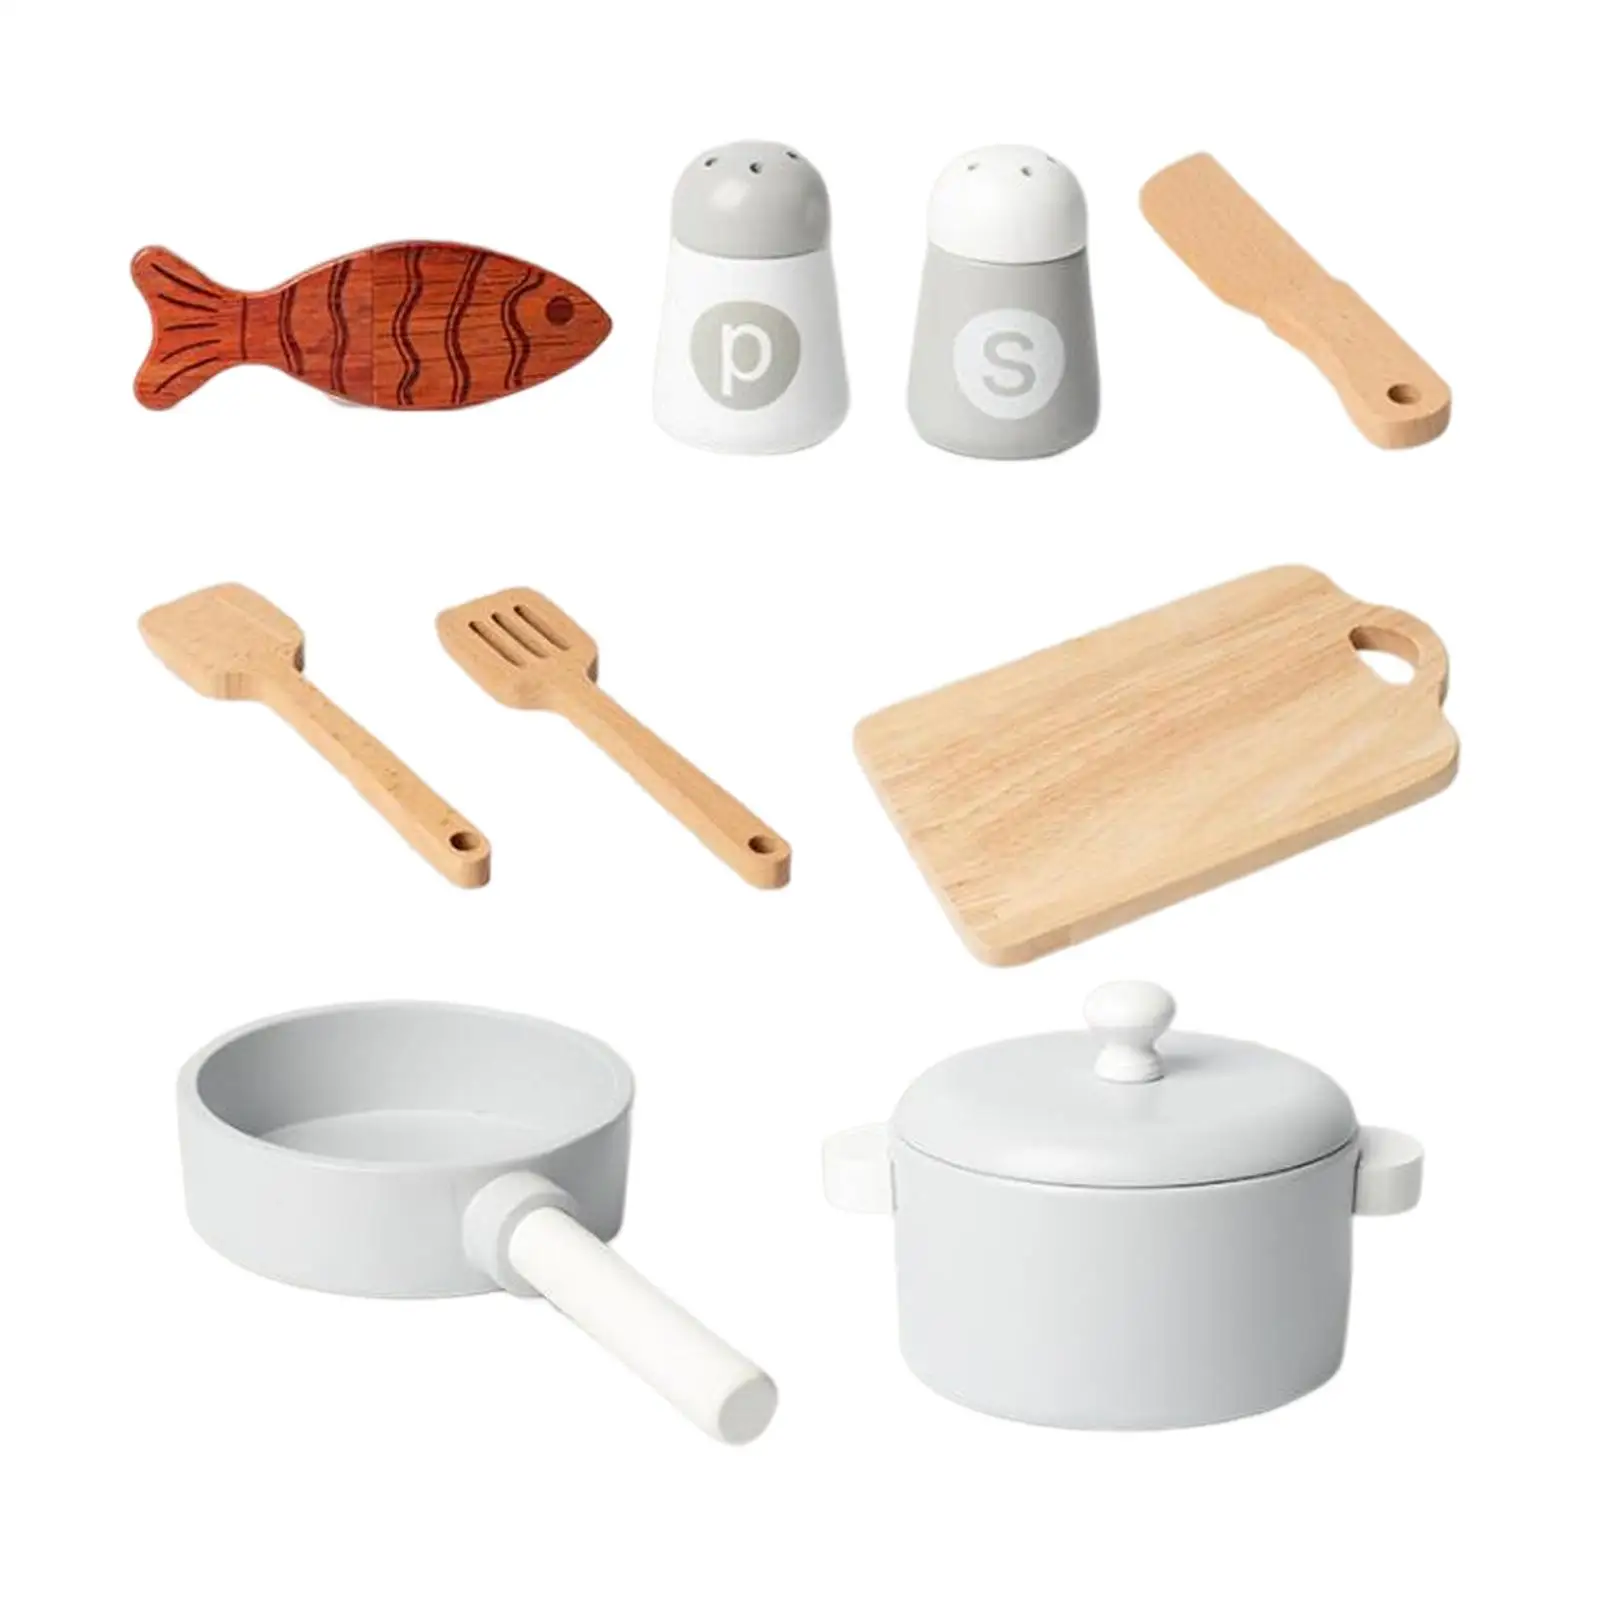 Kitchen Toyset Mini Wooden Toy Educational Play Pretend Play Interest Development Accessories Cookware Set for Cooking Adults